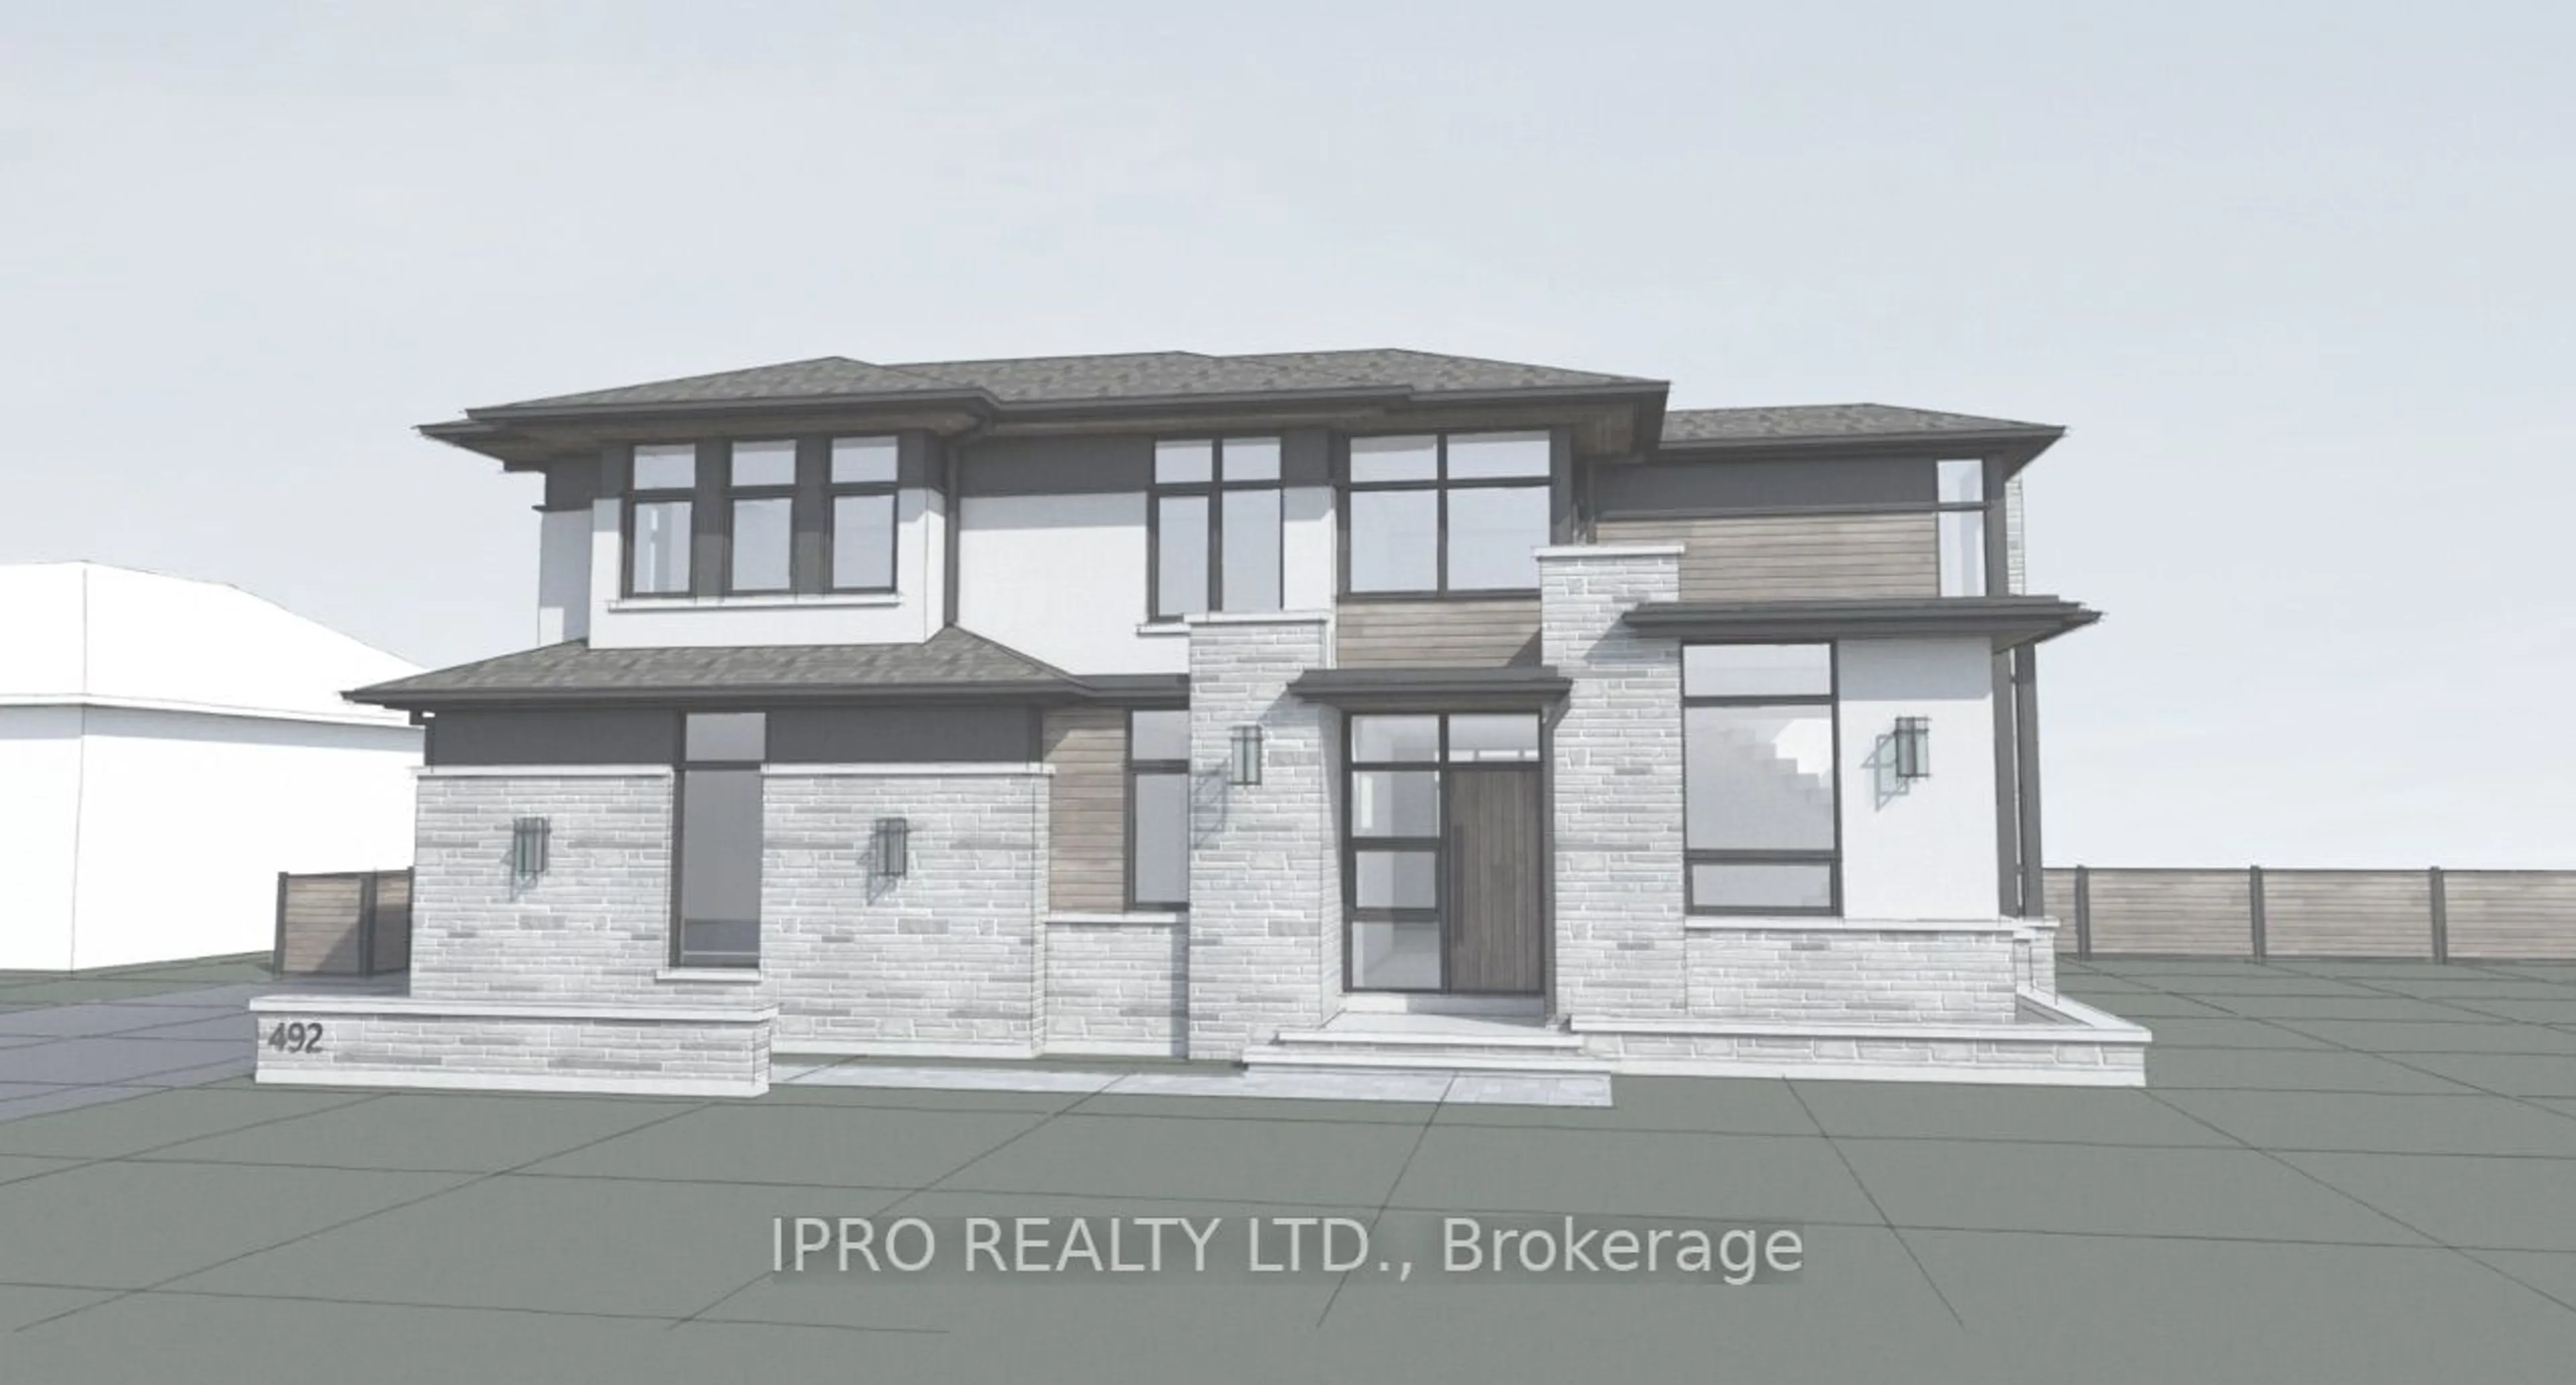 Frontside or backside of a home for 492 Maple Grove Dr, Oakville Ontario L6J 4W2